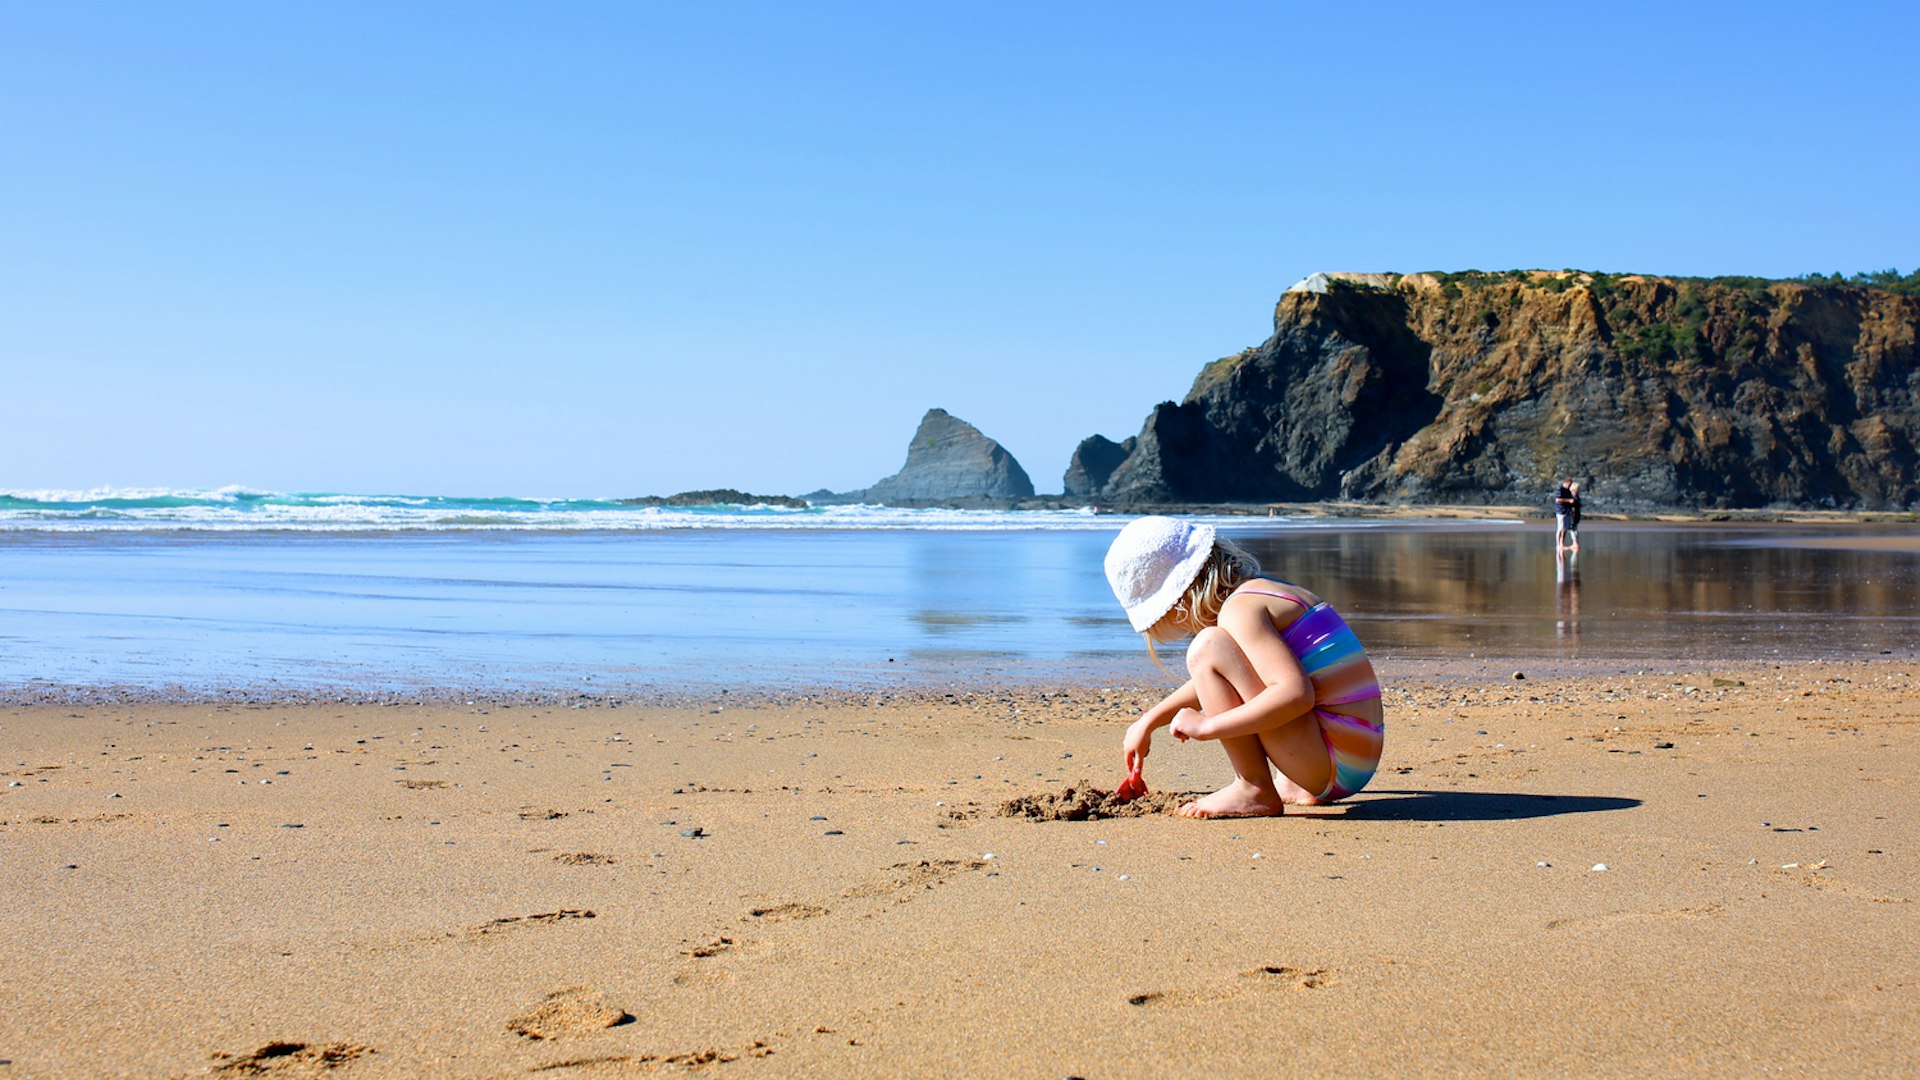 A young child plays with a spade on a sandy beach backed by large cliffs